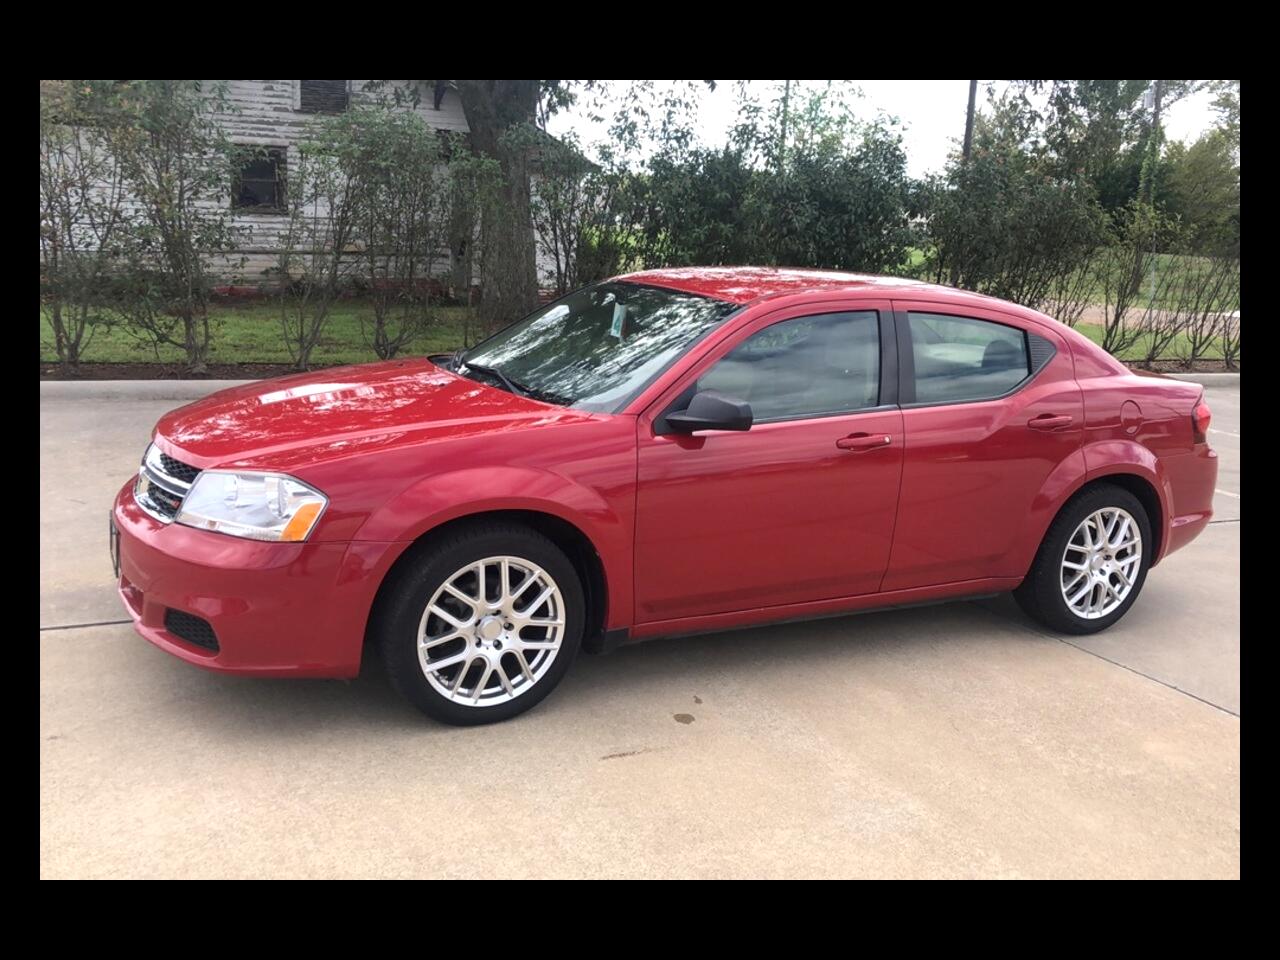 Used 2013 Dodge Avenger 4dr Sdn Se For Sale In Owensboro Ky